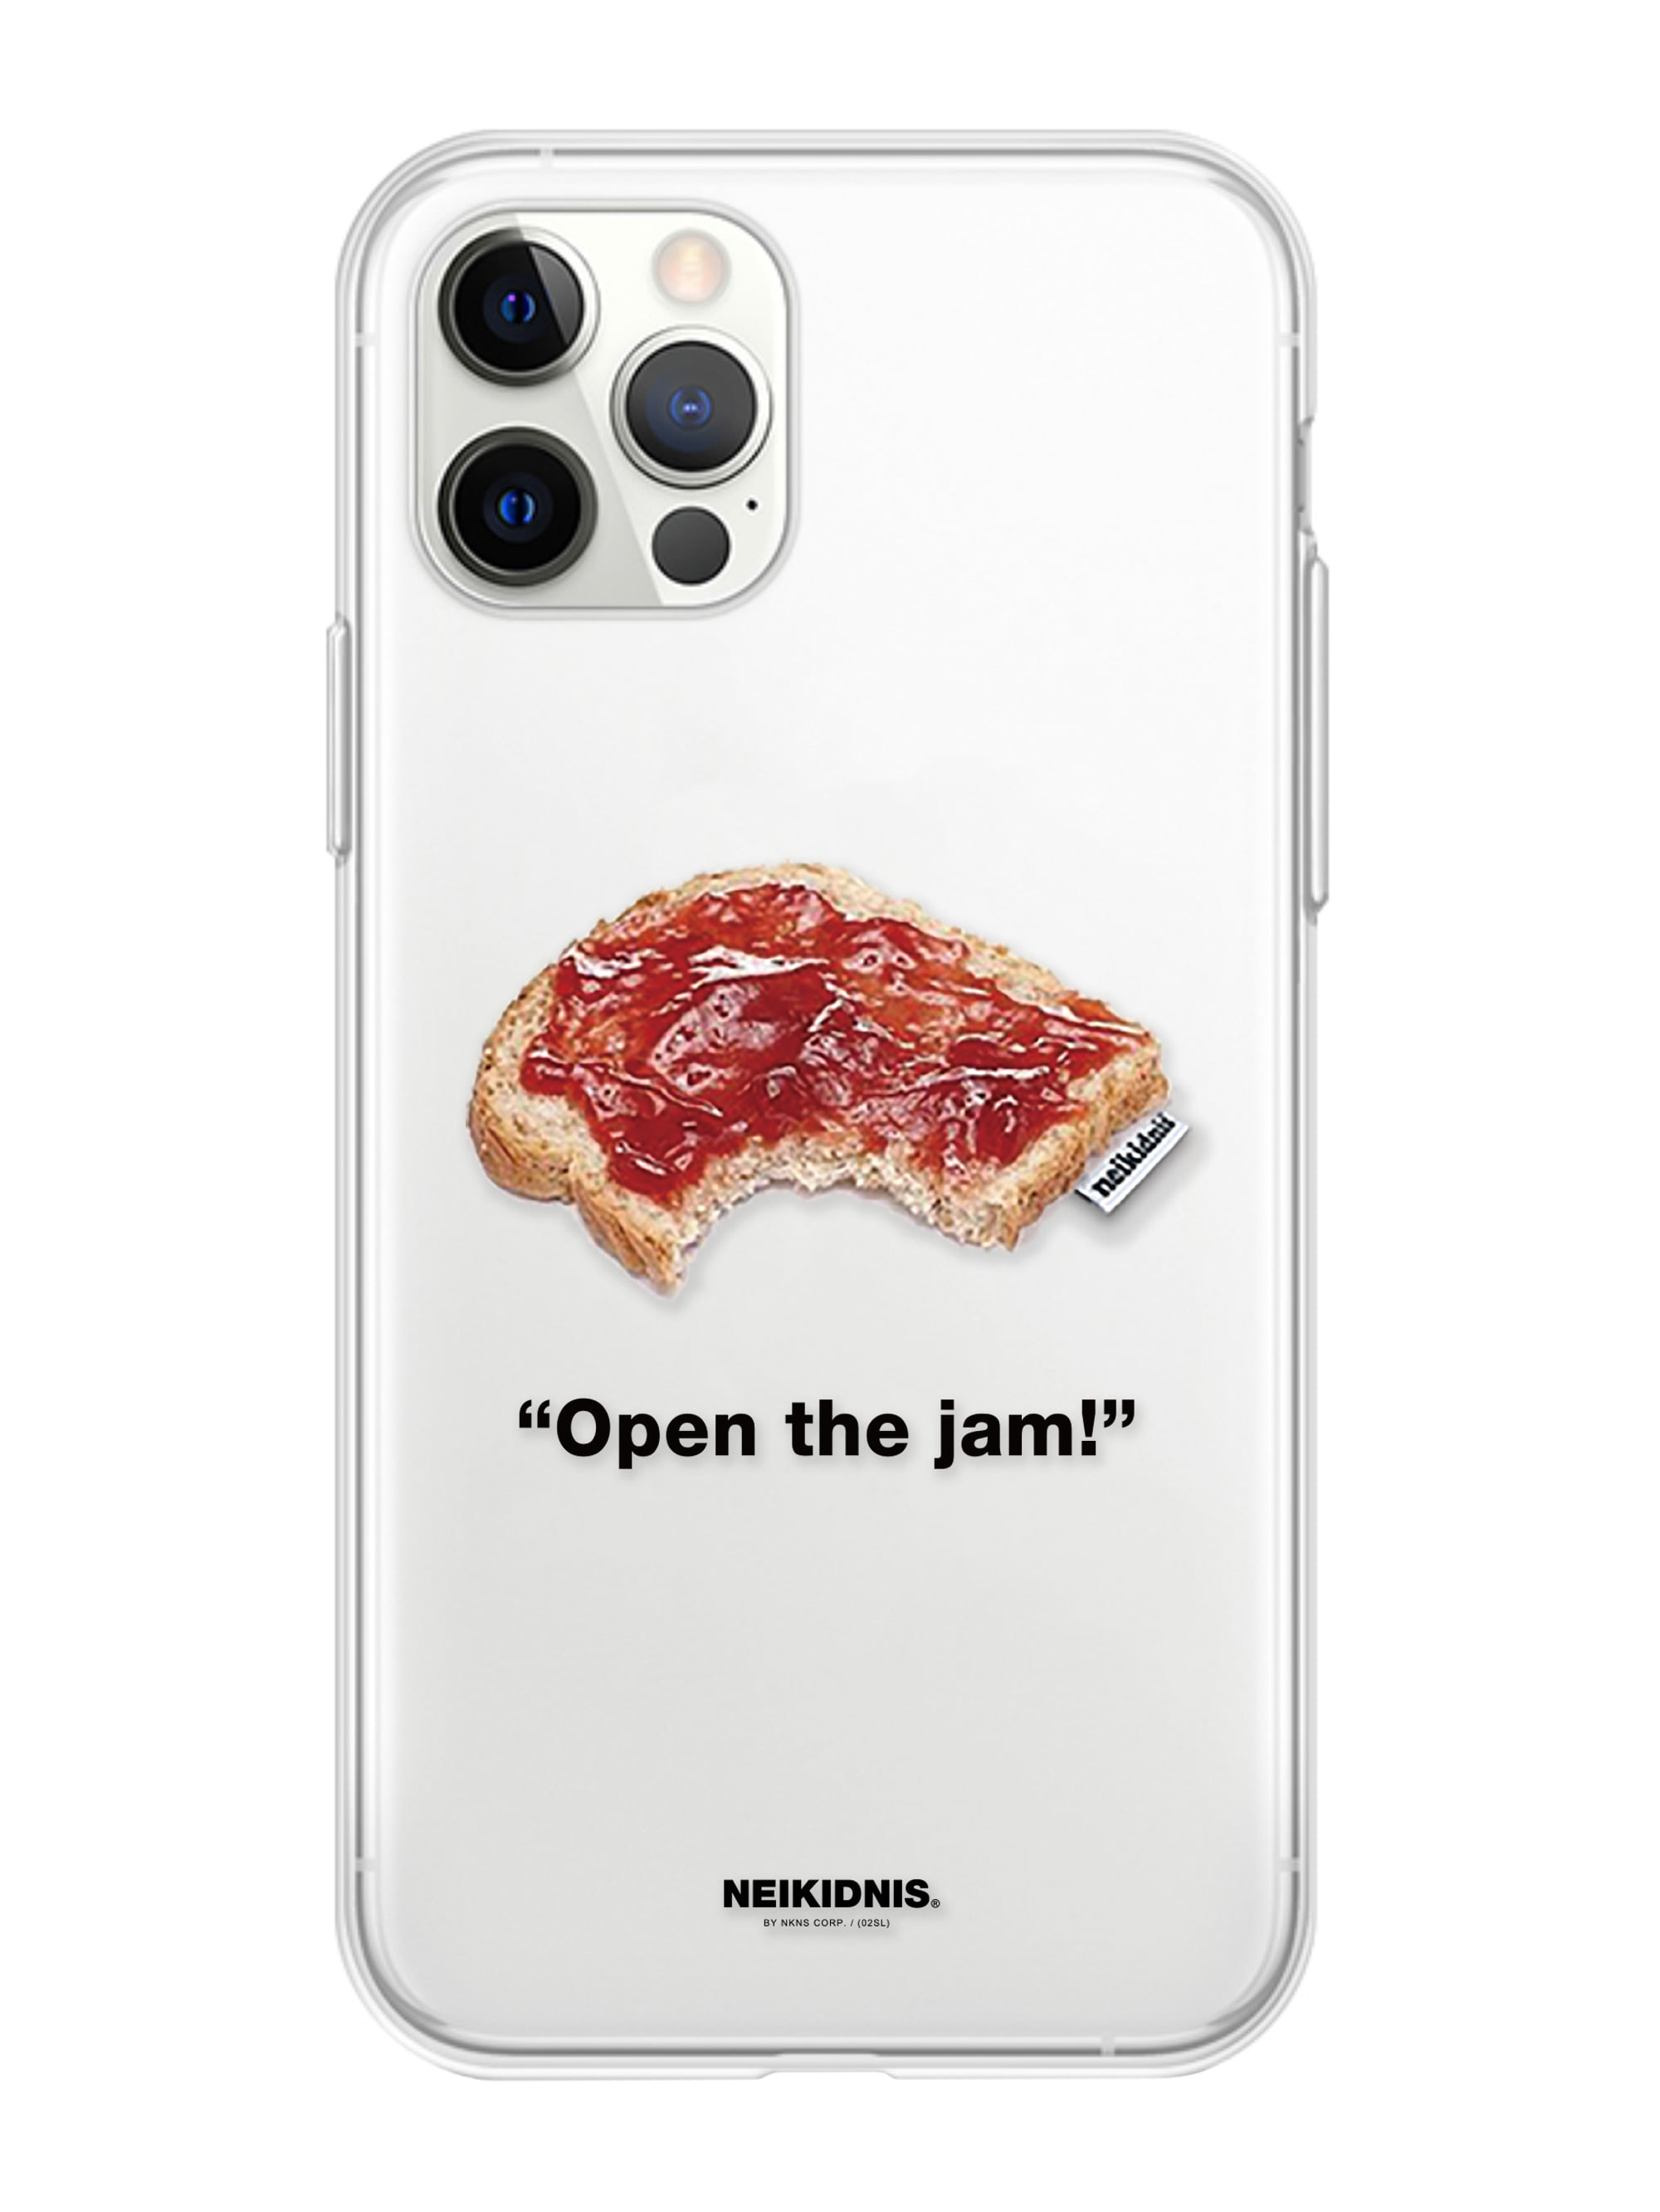 OPEN THE JAM iPHONE CASE / CLEAR